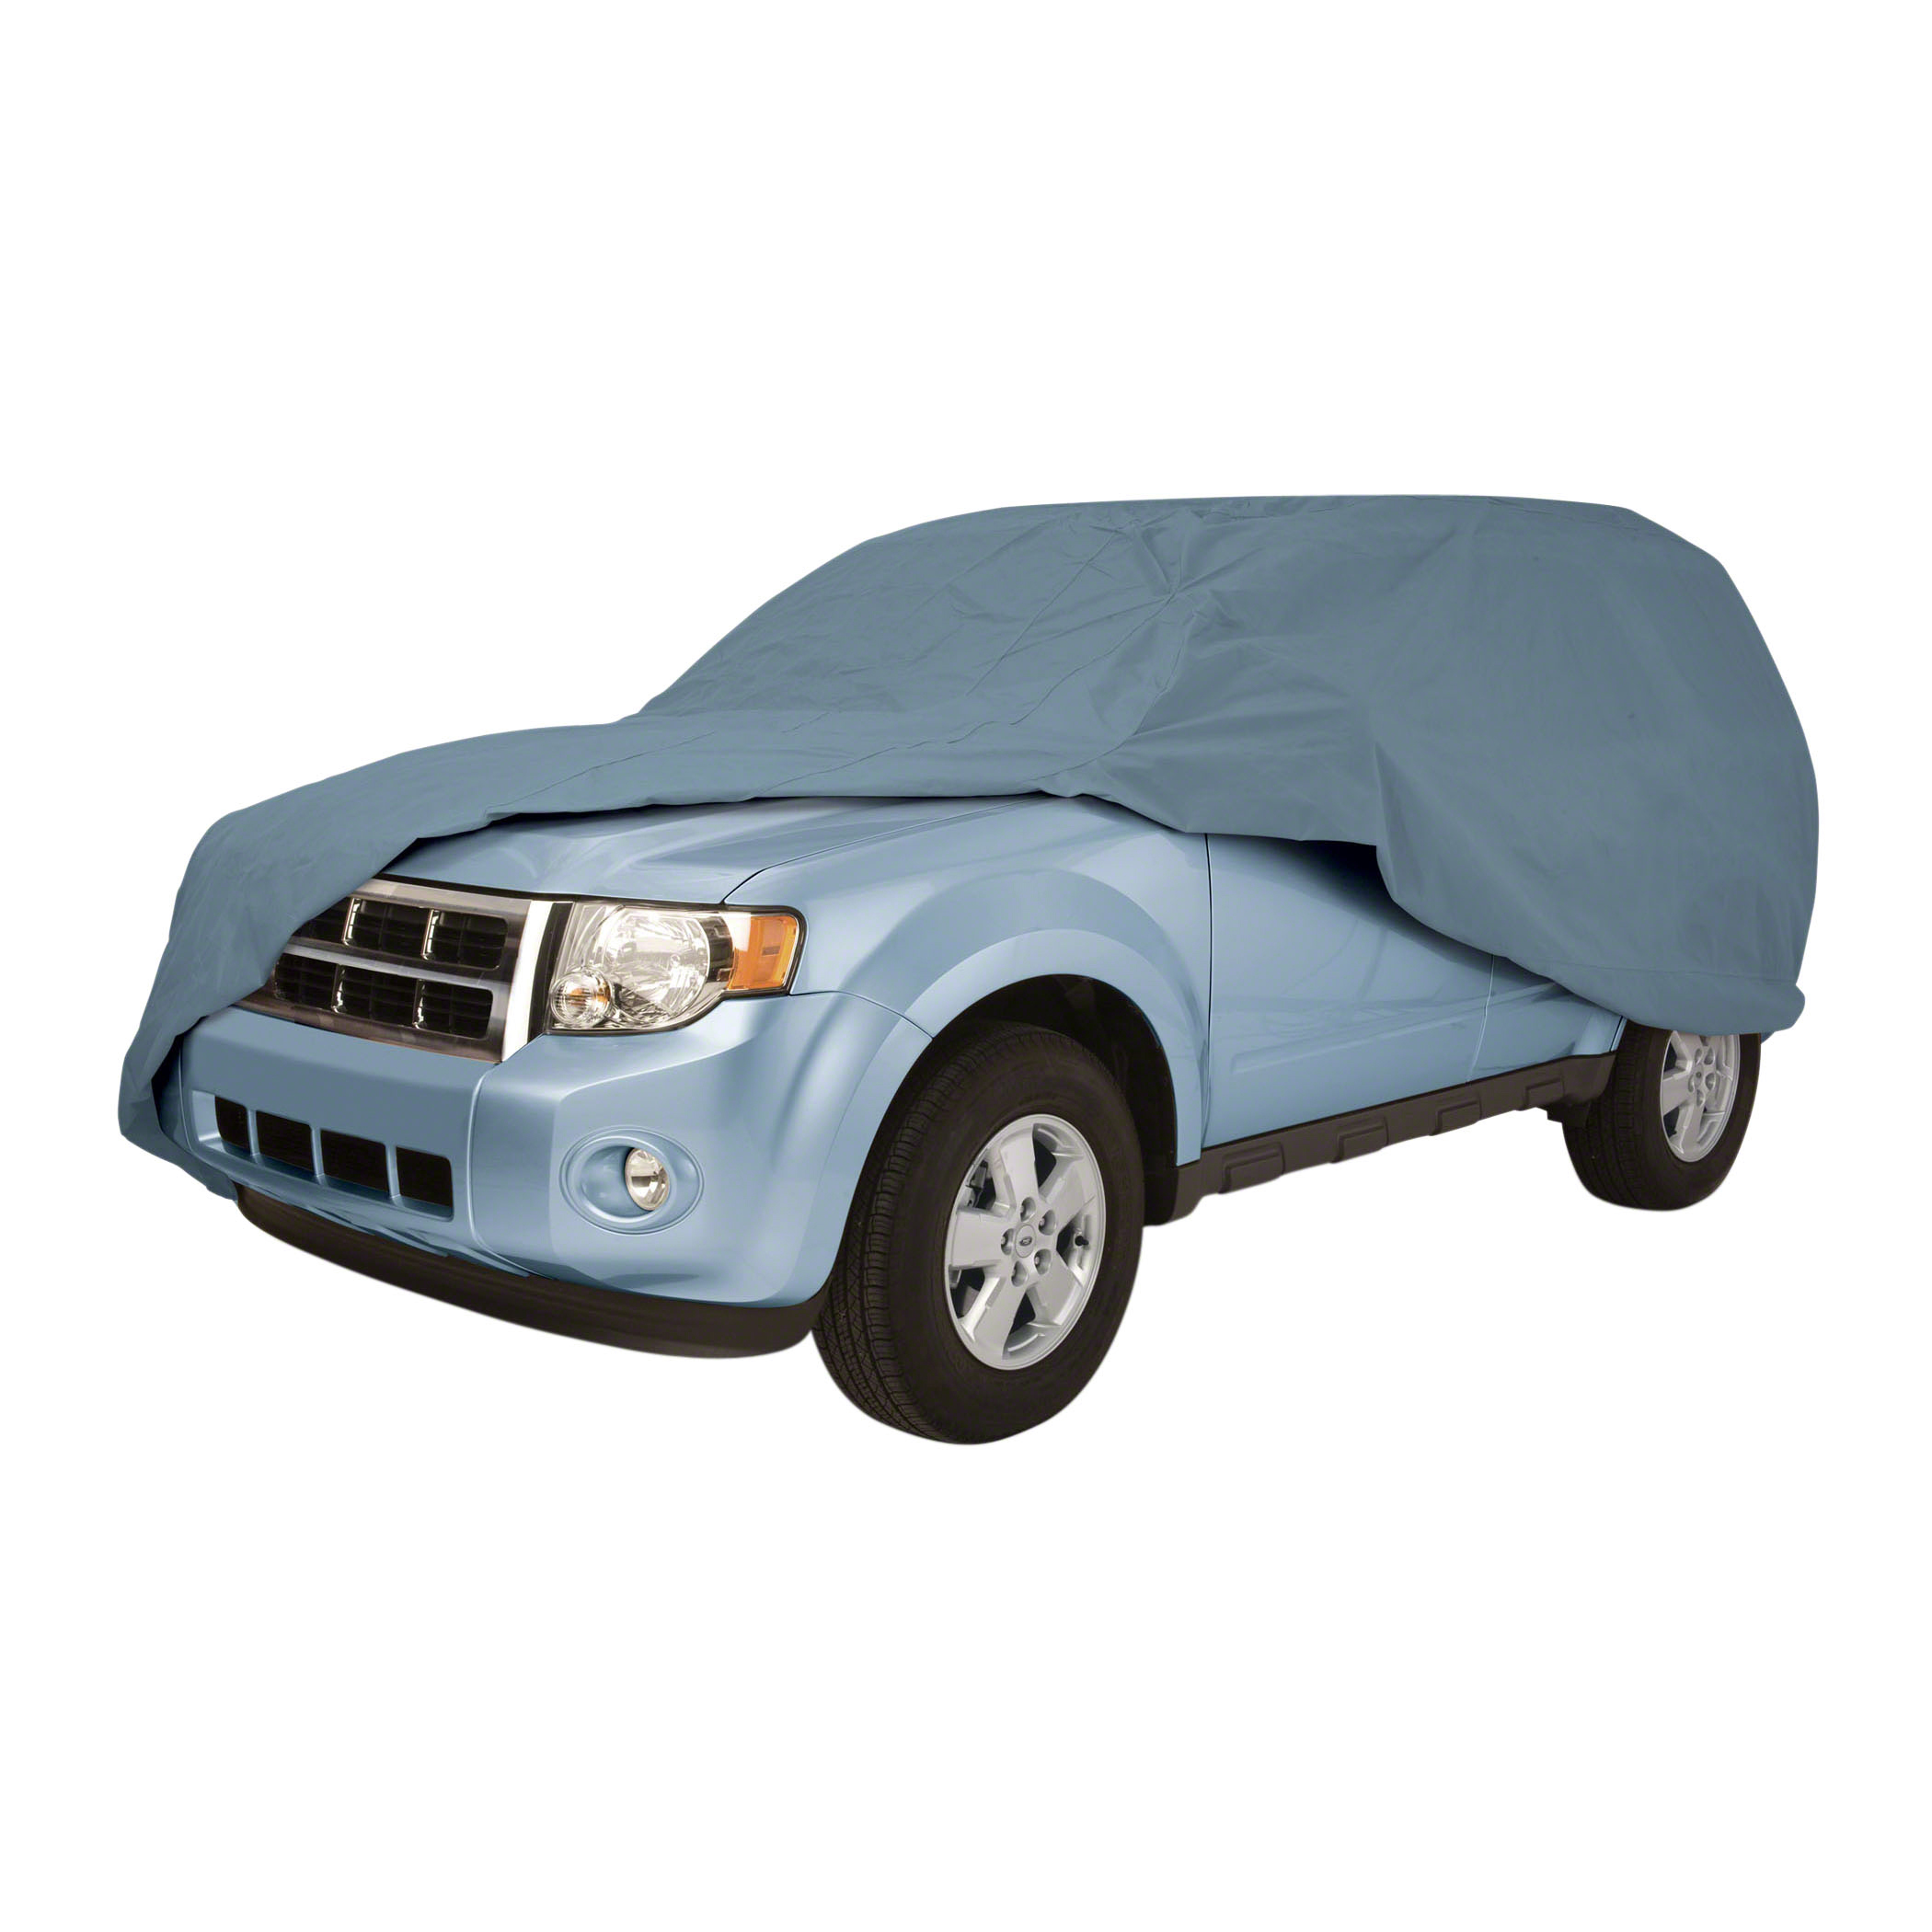 Classic Accessories Over Drive PolyPRO 1 Full-Size SUV and Pickup Cover,  Fits SUVs and pickups 19' - 22' L - 